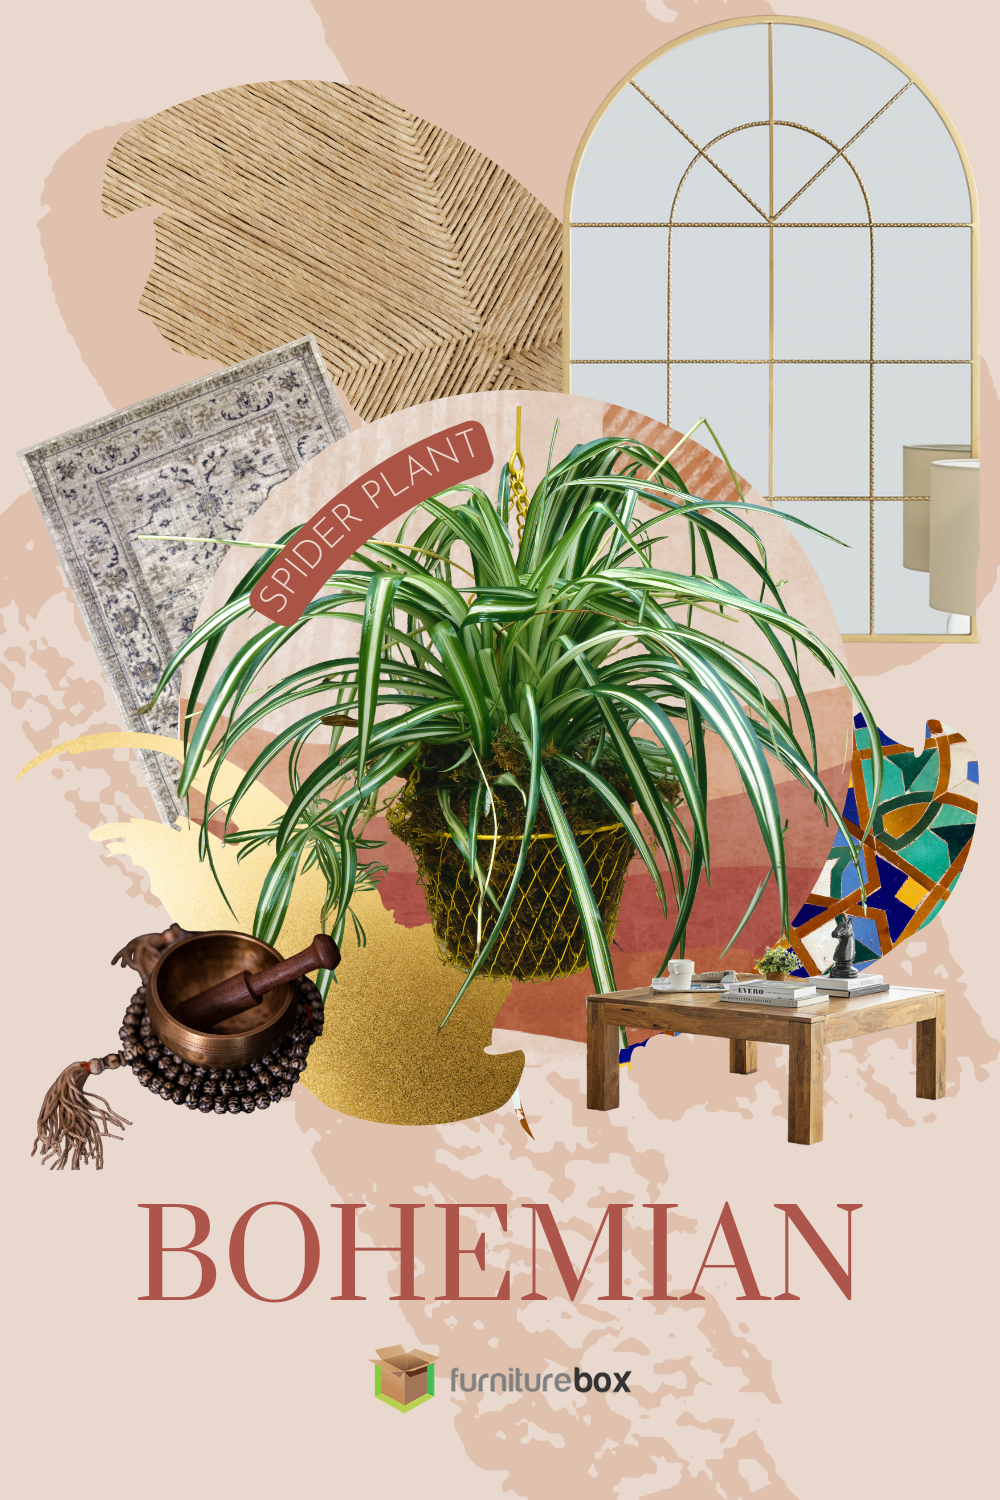 Houseplant interior design for Bohemian style using a spider plant and boho colours, patterns and furniture pieces. 